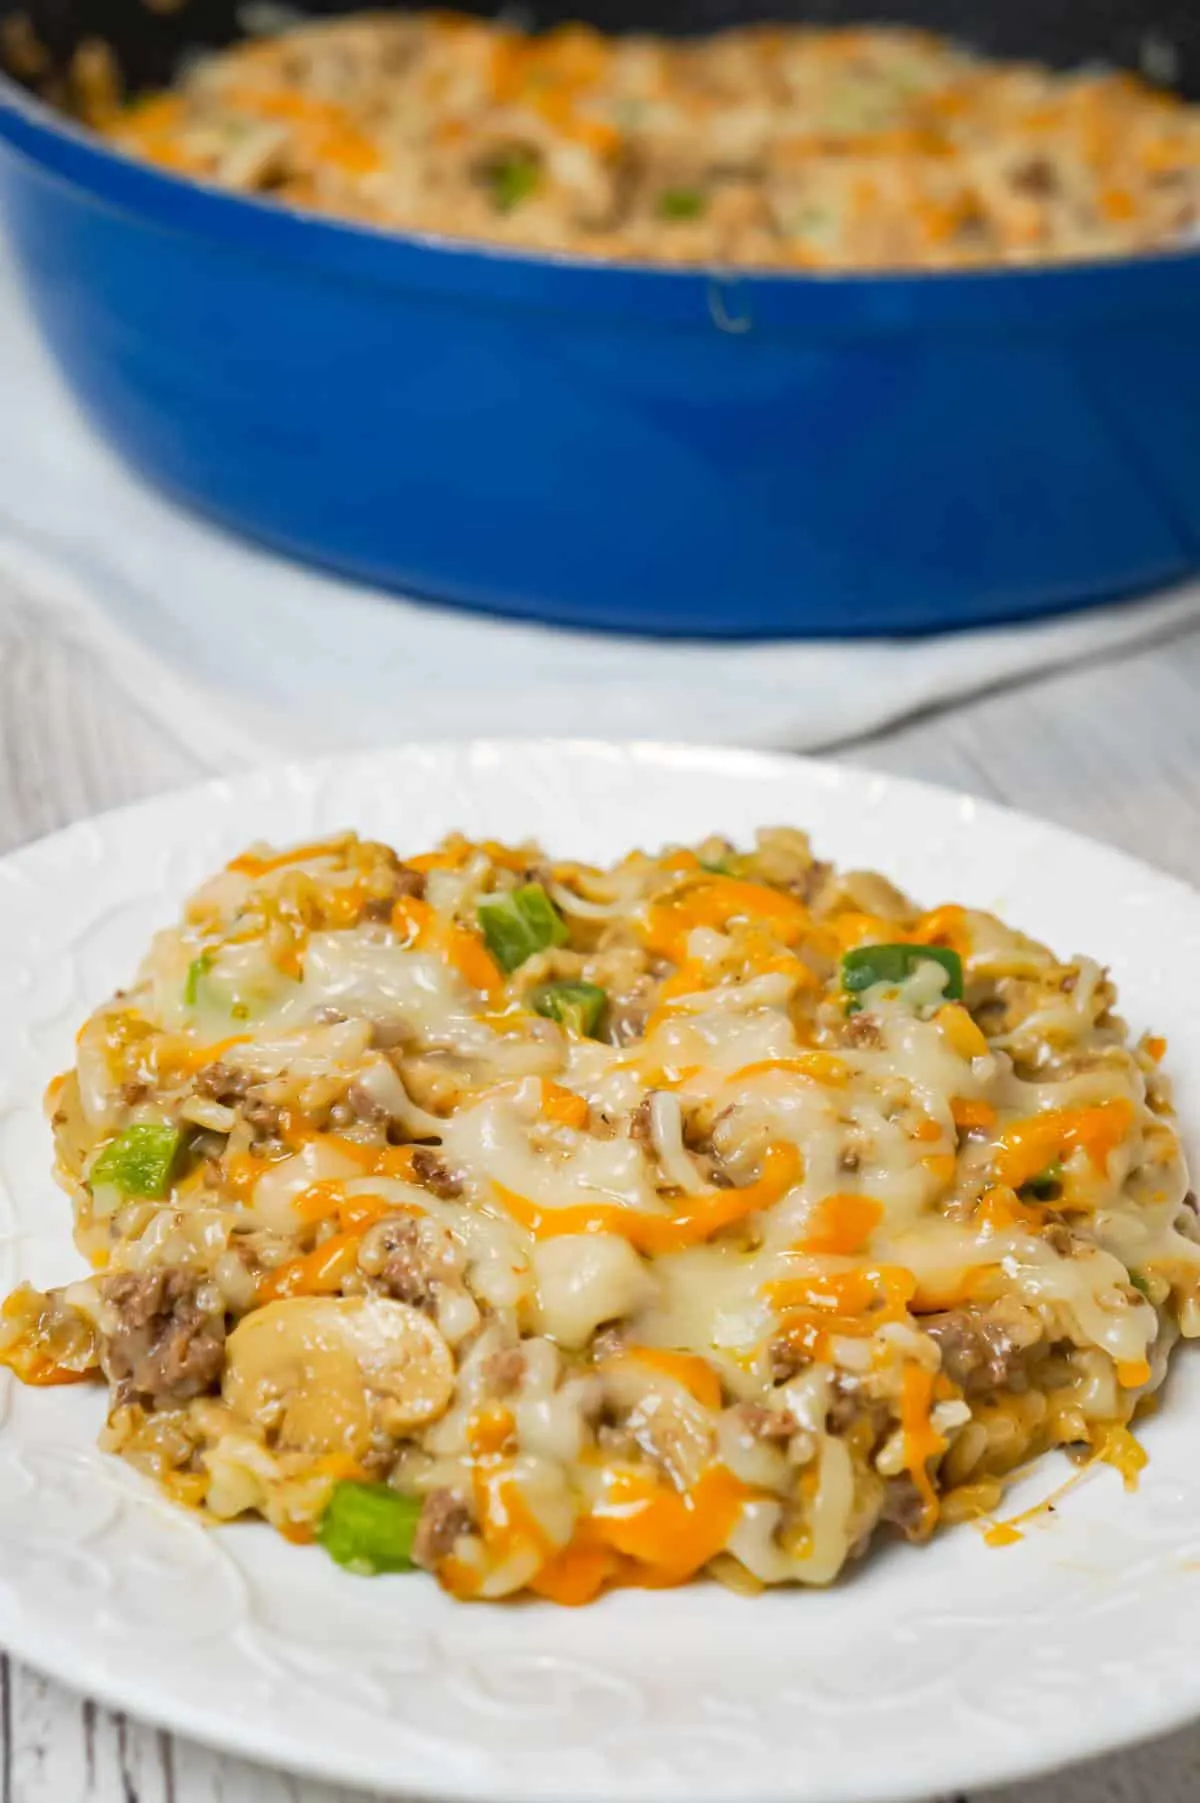 One Pot Philly Cheese Steak Ground Beef and Rice is an easy stove top dinner recipe loaded with hamburger meat, green peppers, sliced mushrooms, instant rice, cream of mushroom soup and shredded cheese.